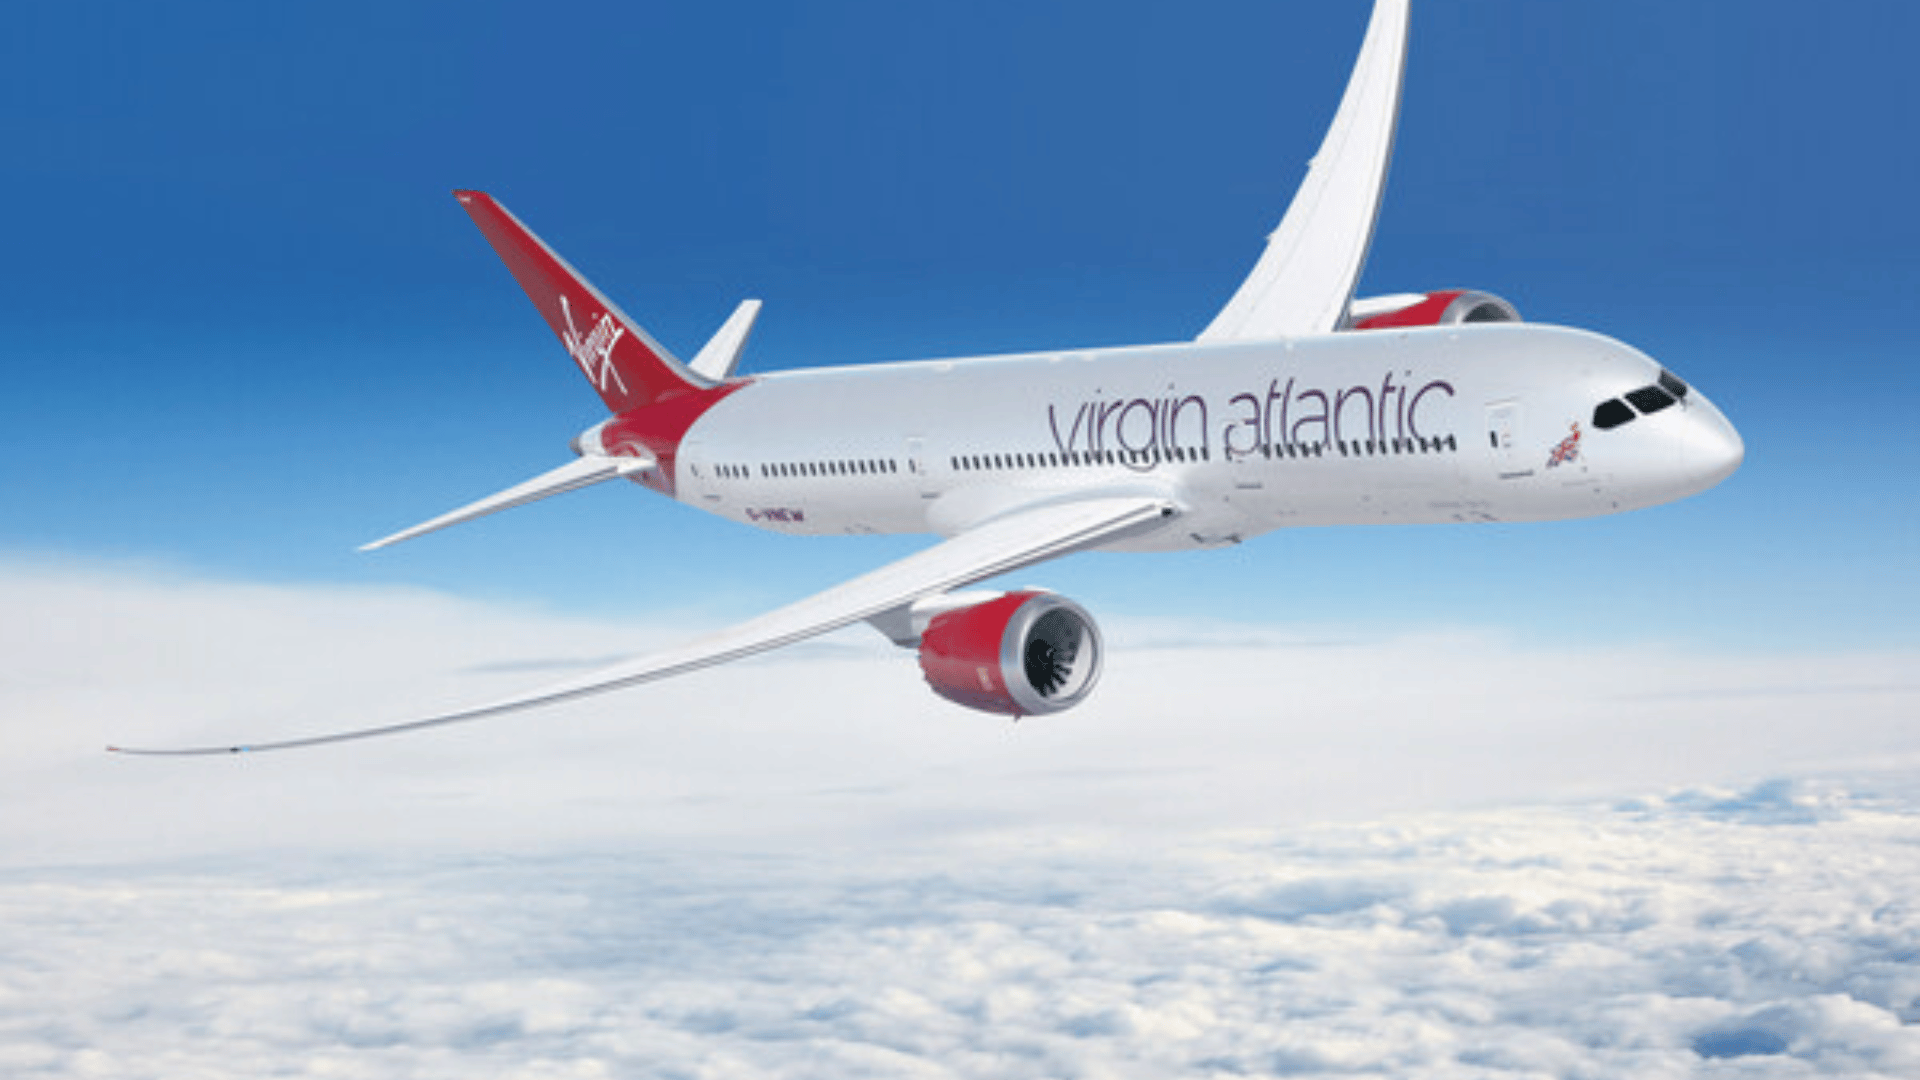 Virgin Atlantic flies world’s first 100% Sustainable Aviation Fuel flight from London to New York City.